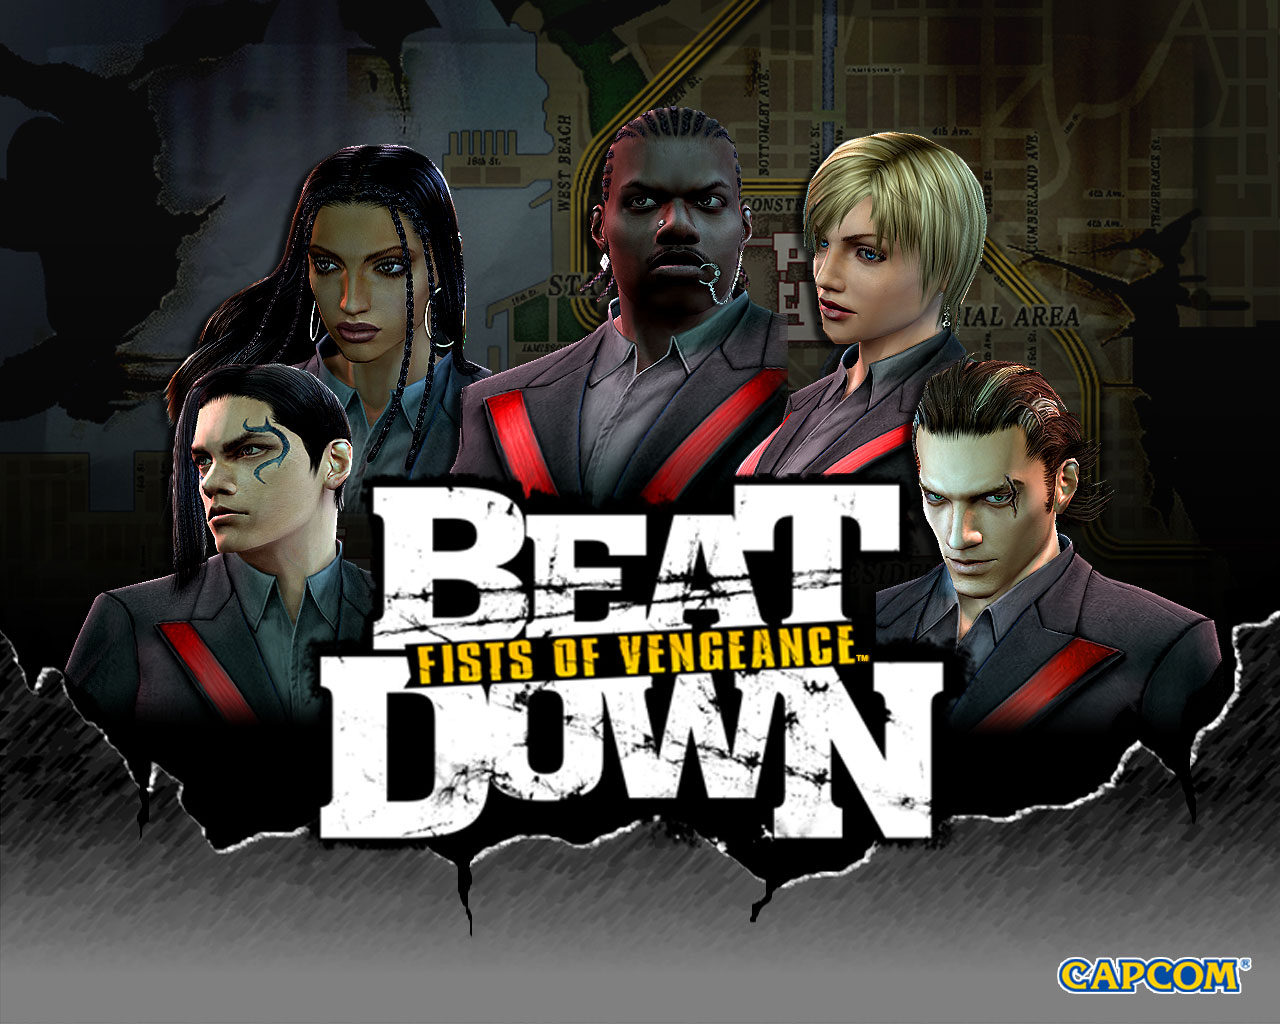 Down 1 8 and 7. Beatdown игра ps2. Beat down ps2. Beat down first of Vengeance ps2. Beat down обложка ps2.